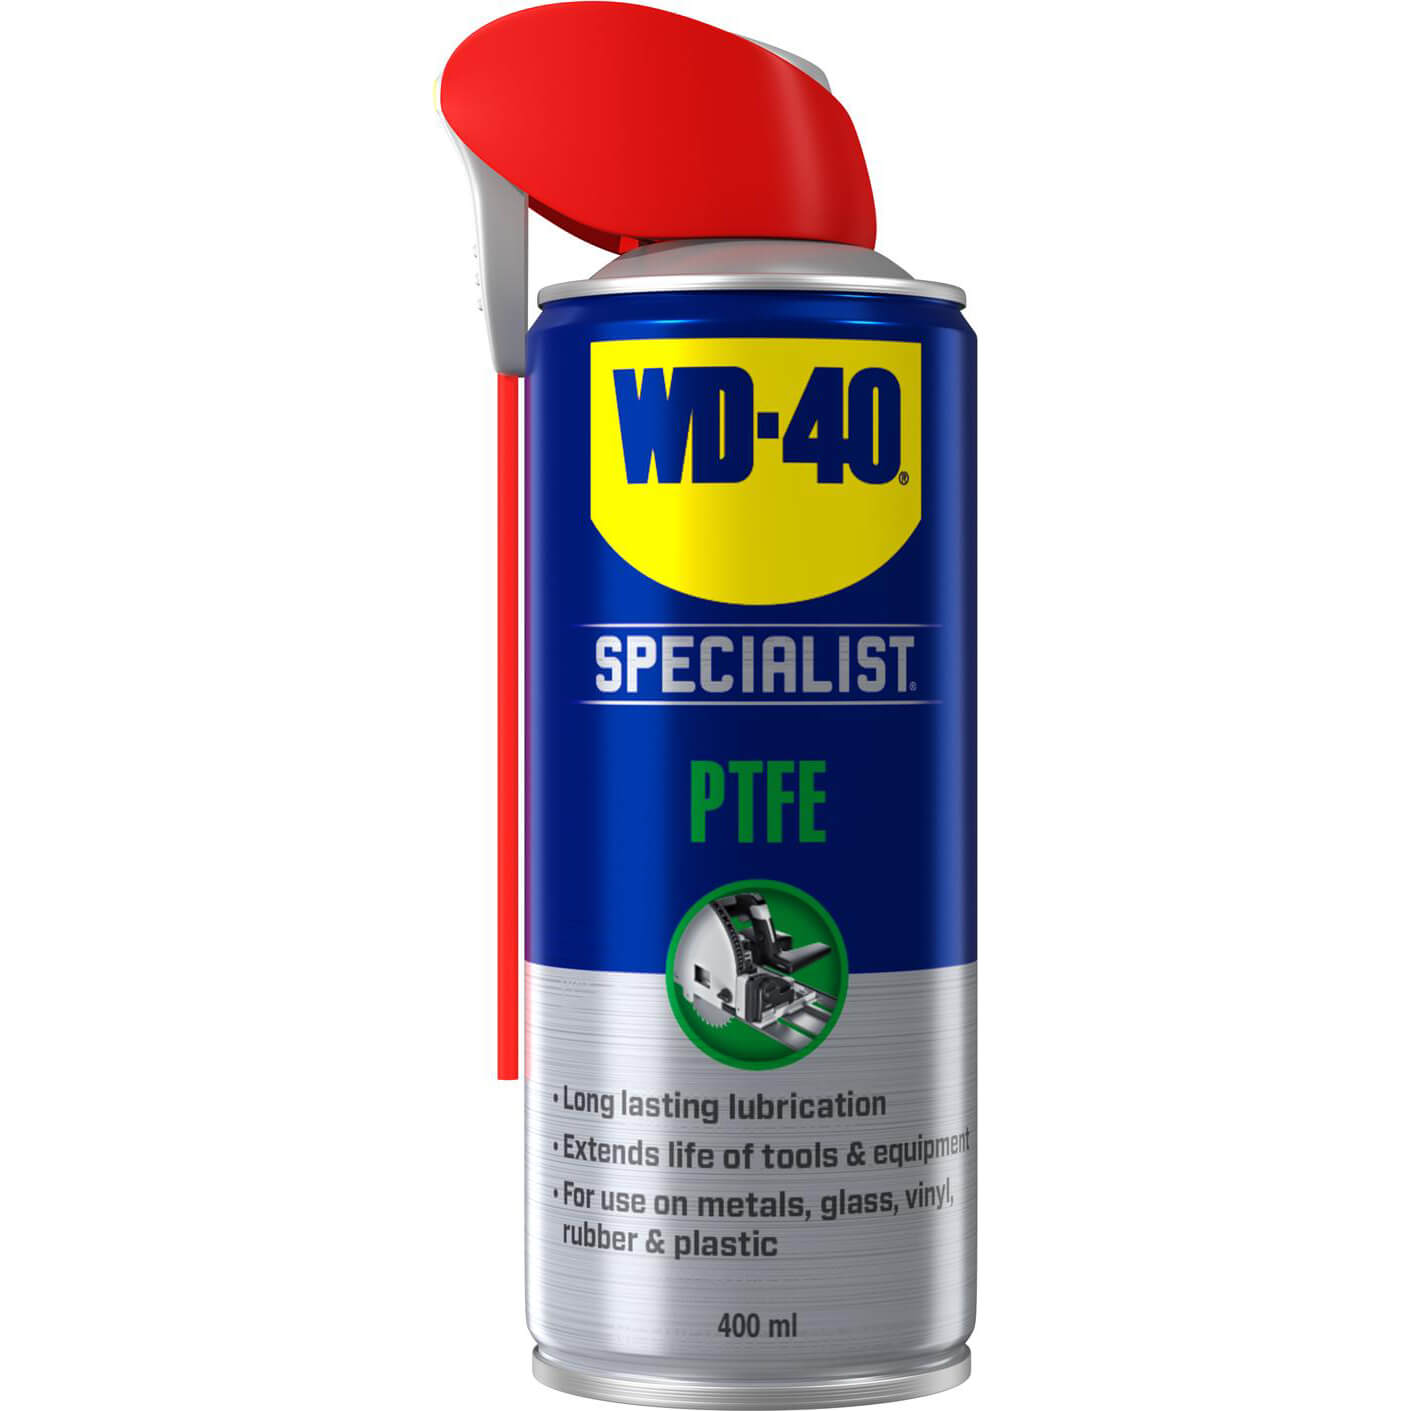 Wd 40 состав. WD 40. WD-40 Specialist. WD 40 Grease Yellow. Wd40 фиксатор.